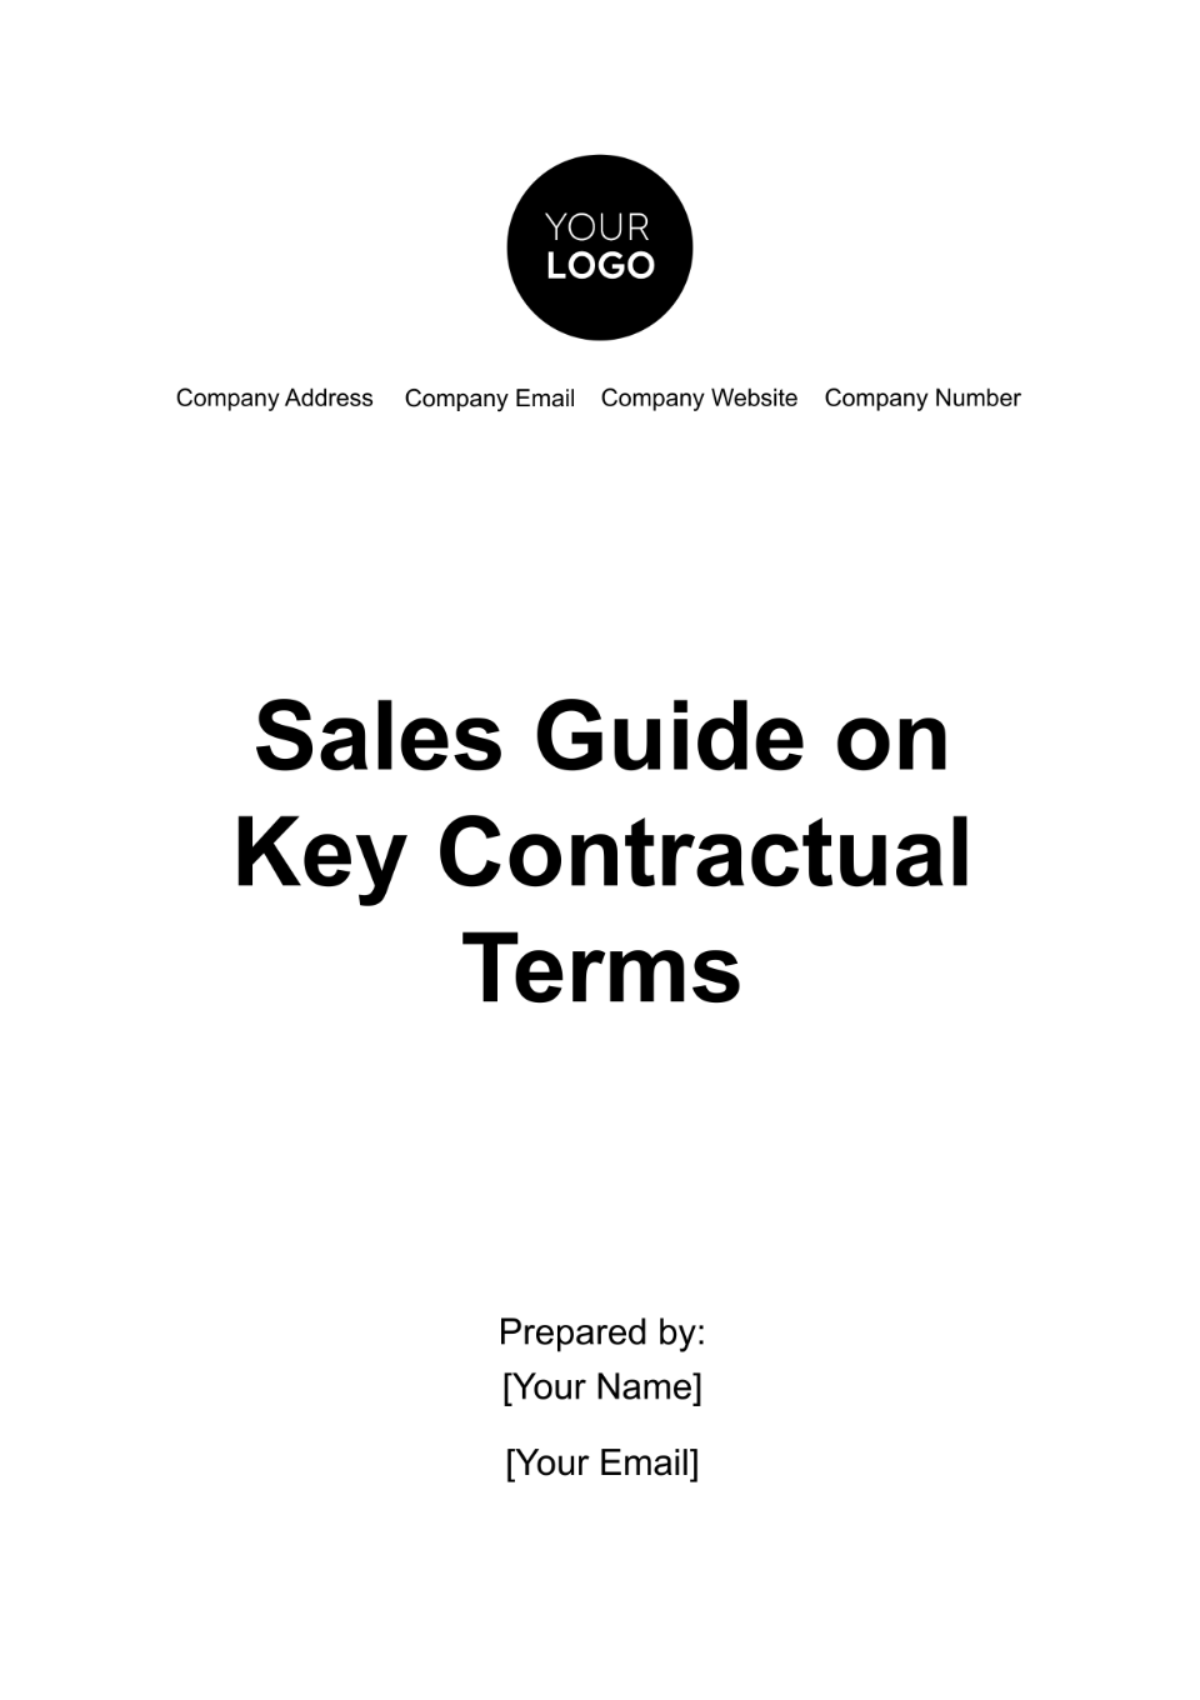 Free Sales Guide on Key Contractual Terms Template